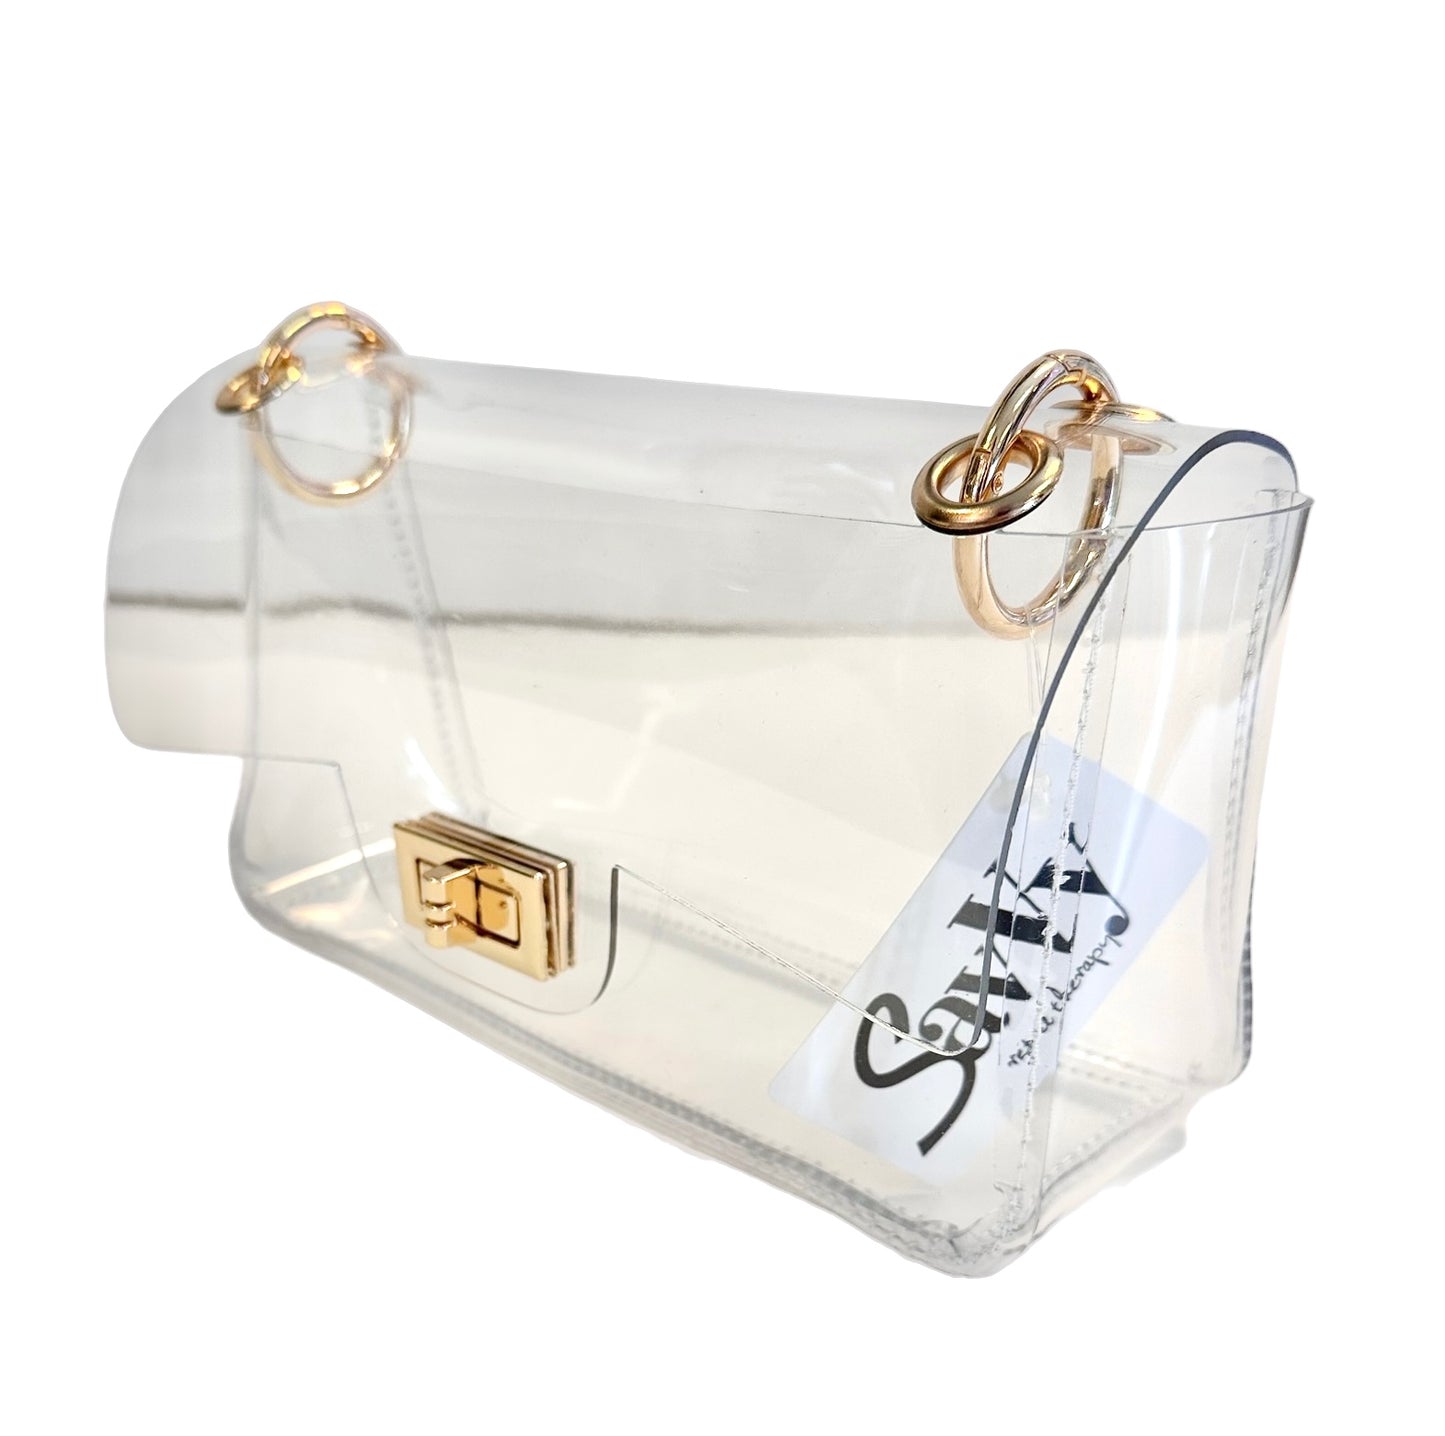 Clear Clutch with Gold Hardware